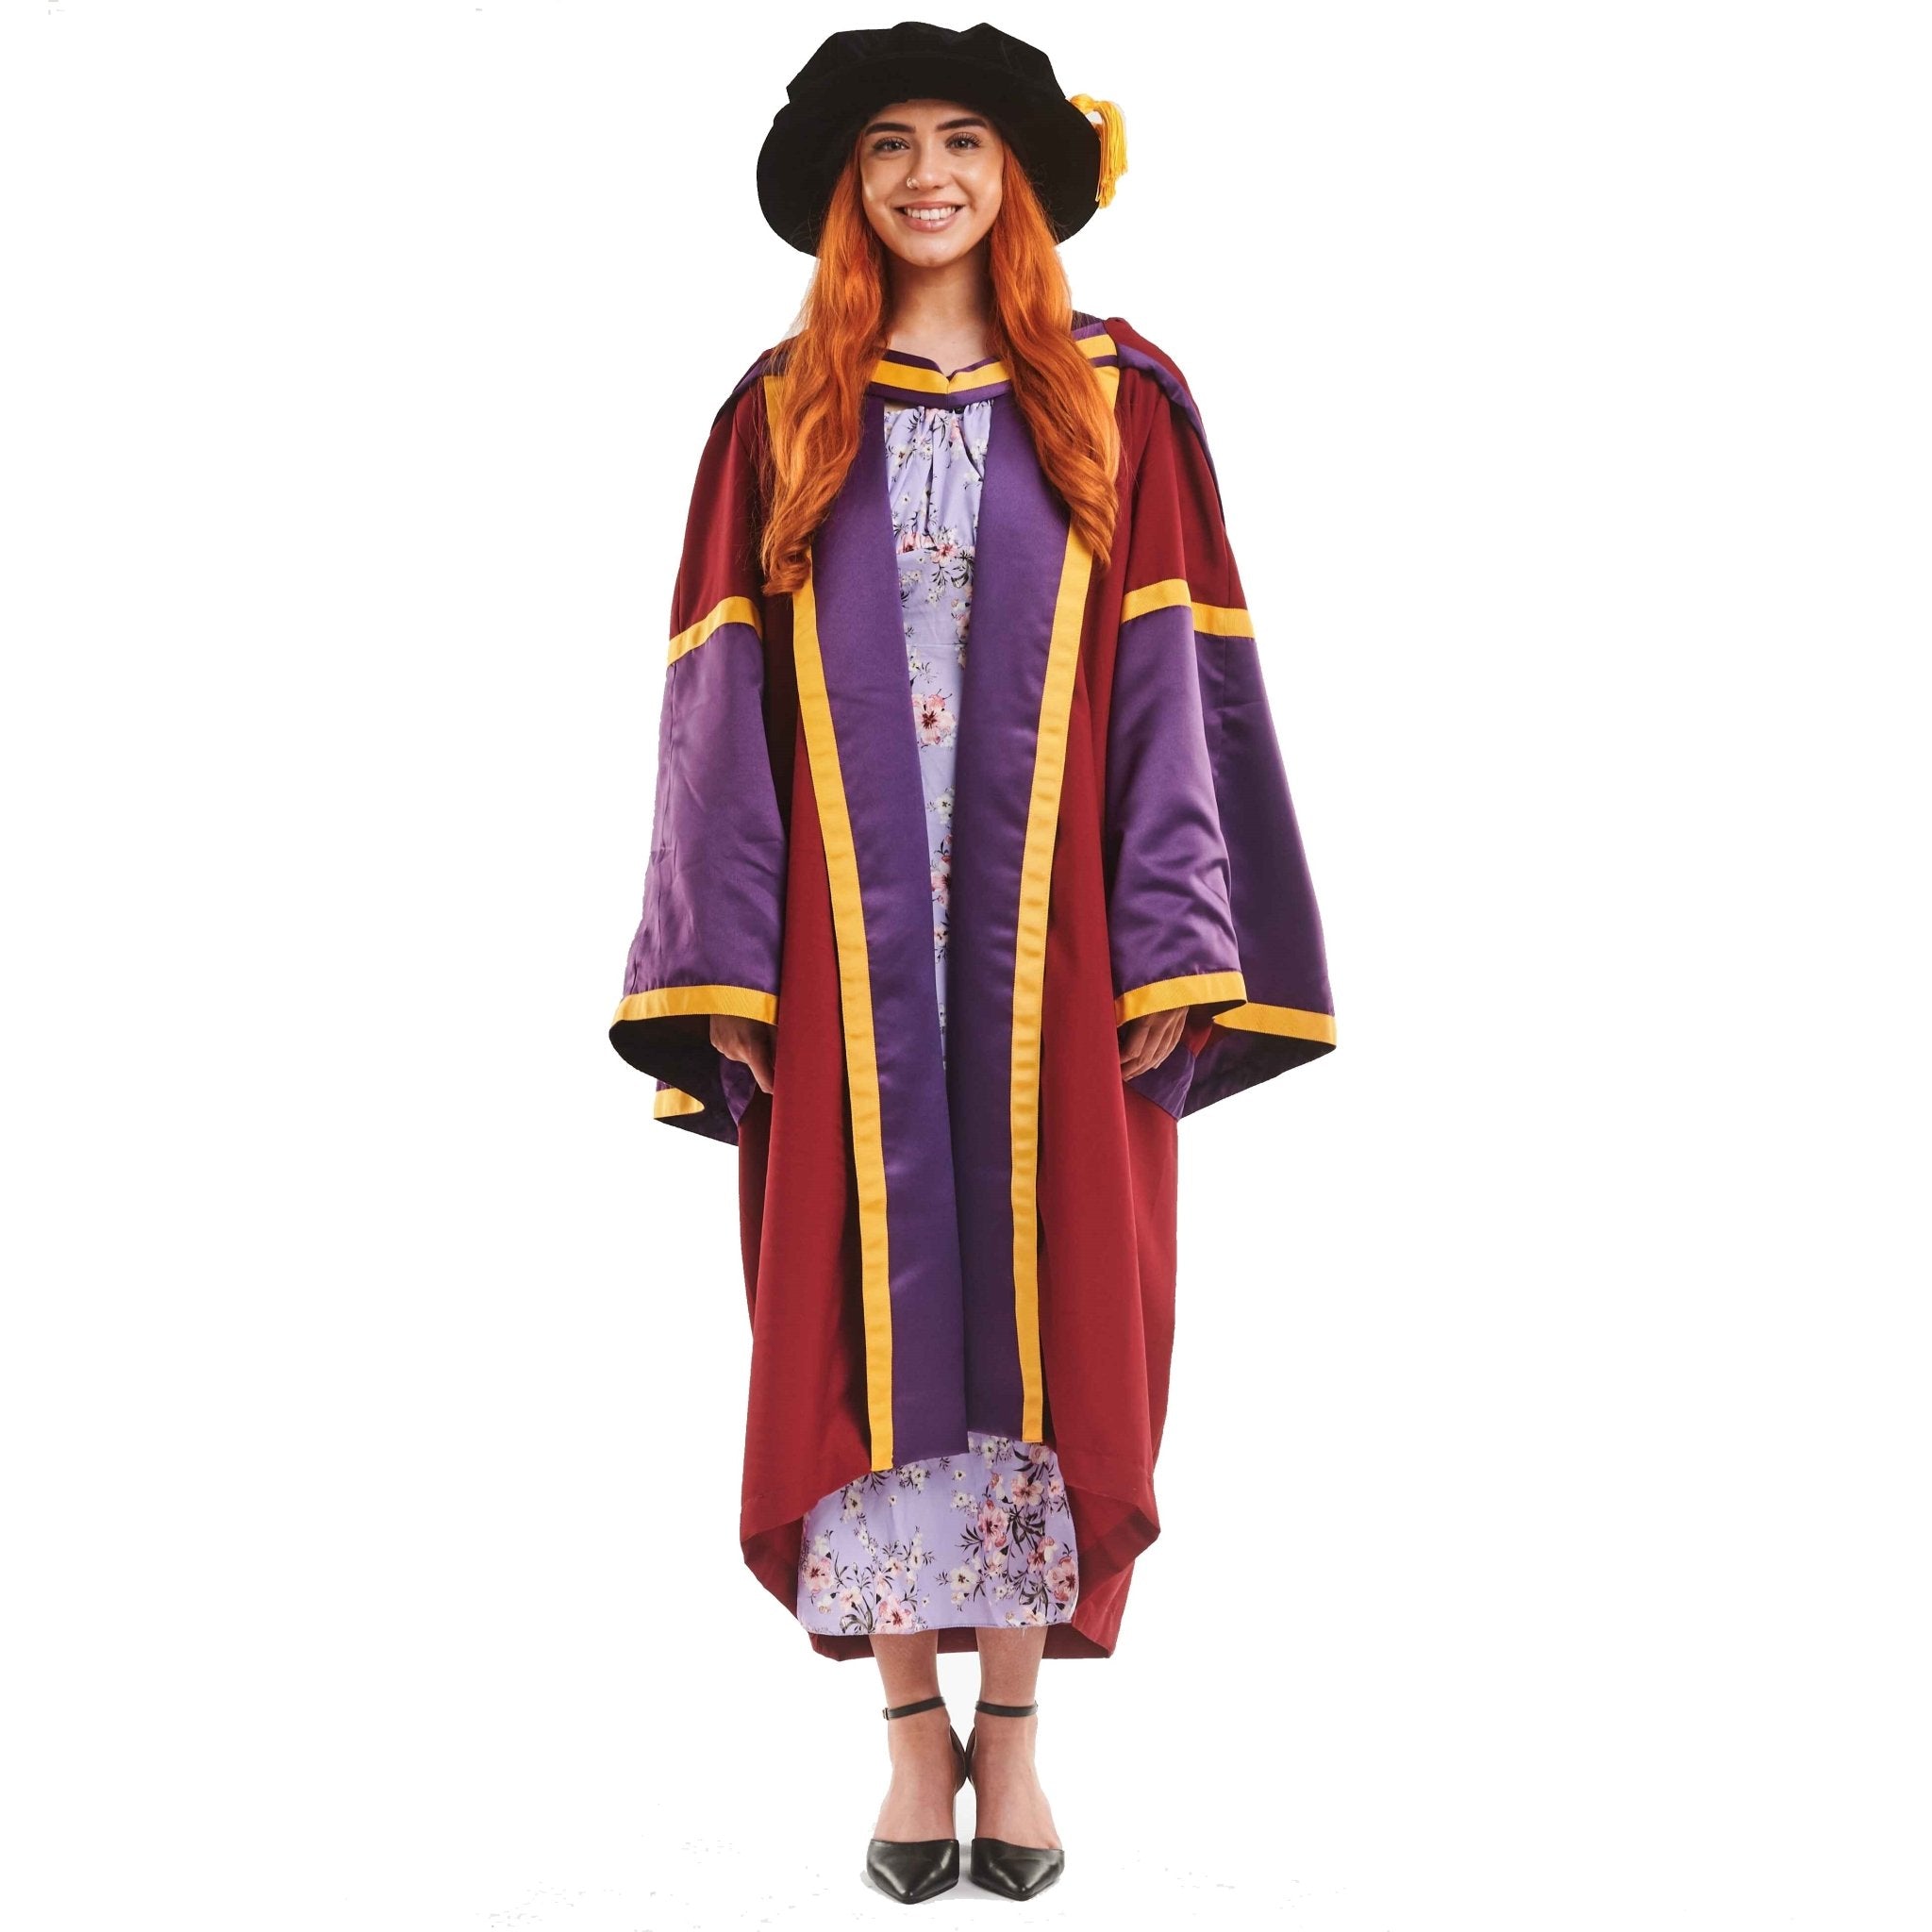 Official MSU Doctoral Gown, 48% OFF | www.vascom.hr